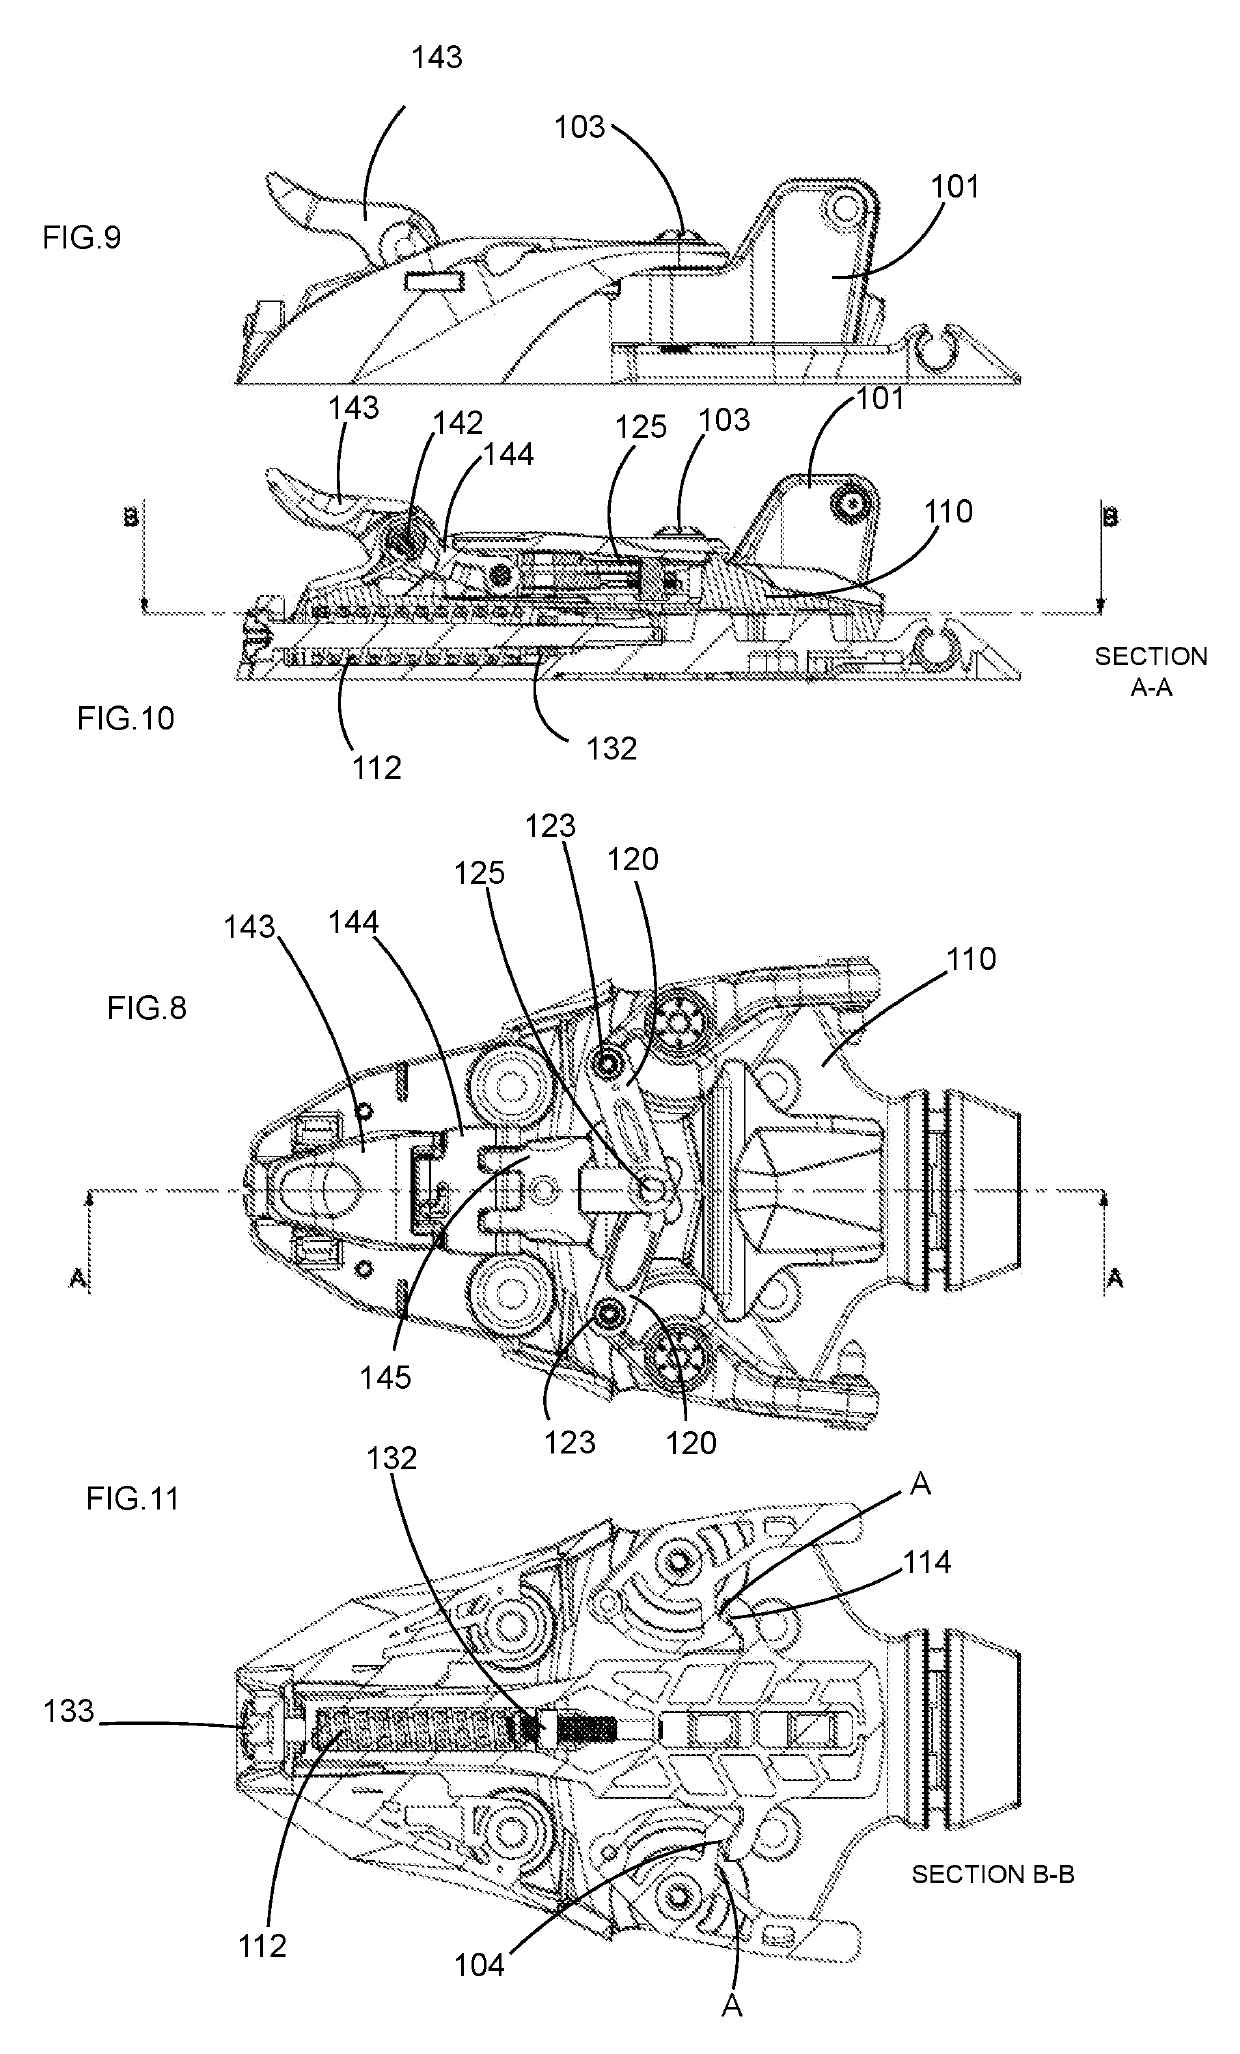 Stop for shoe binding device